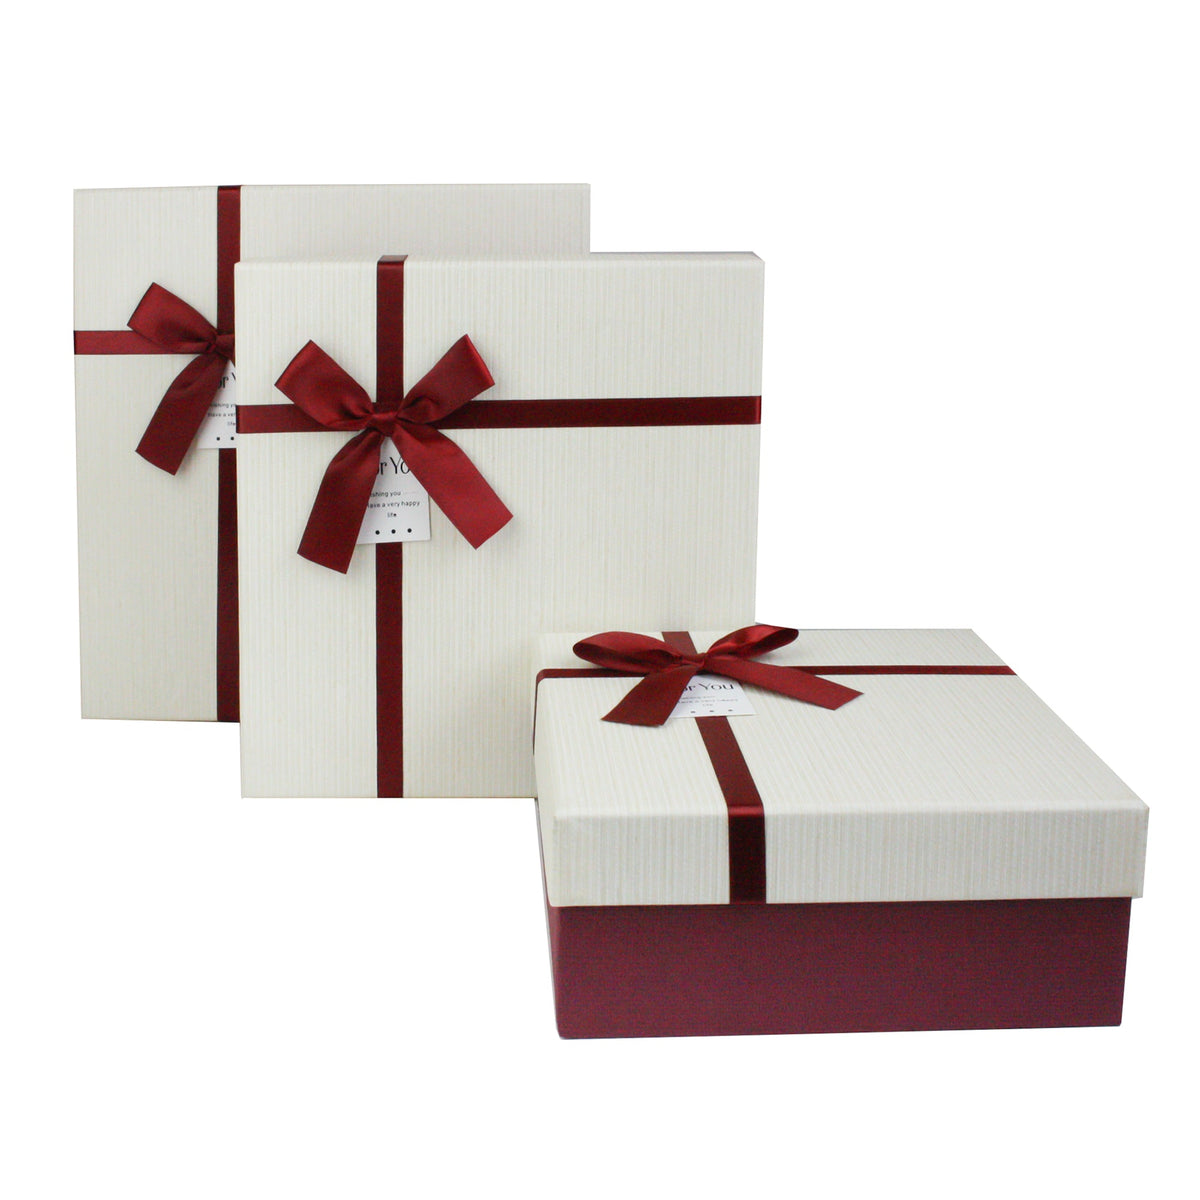 Set of 3 Burgundy/Cream Gift Boxes With Red Satin Ribbon (Sizes Available)